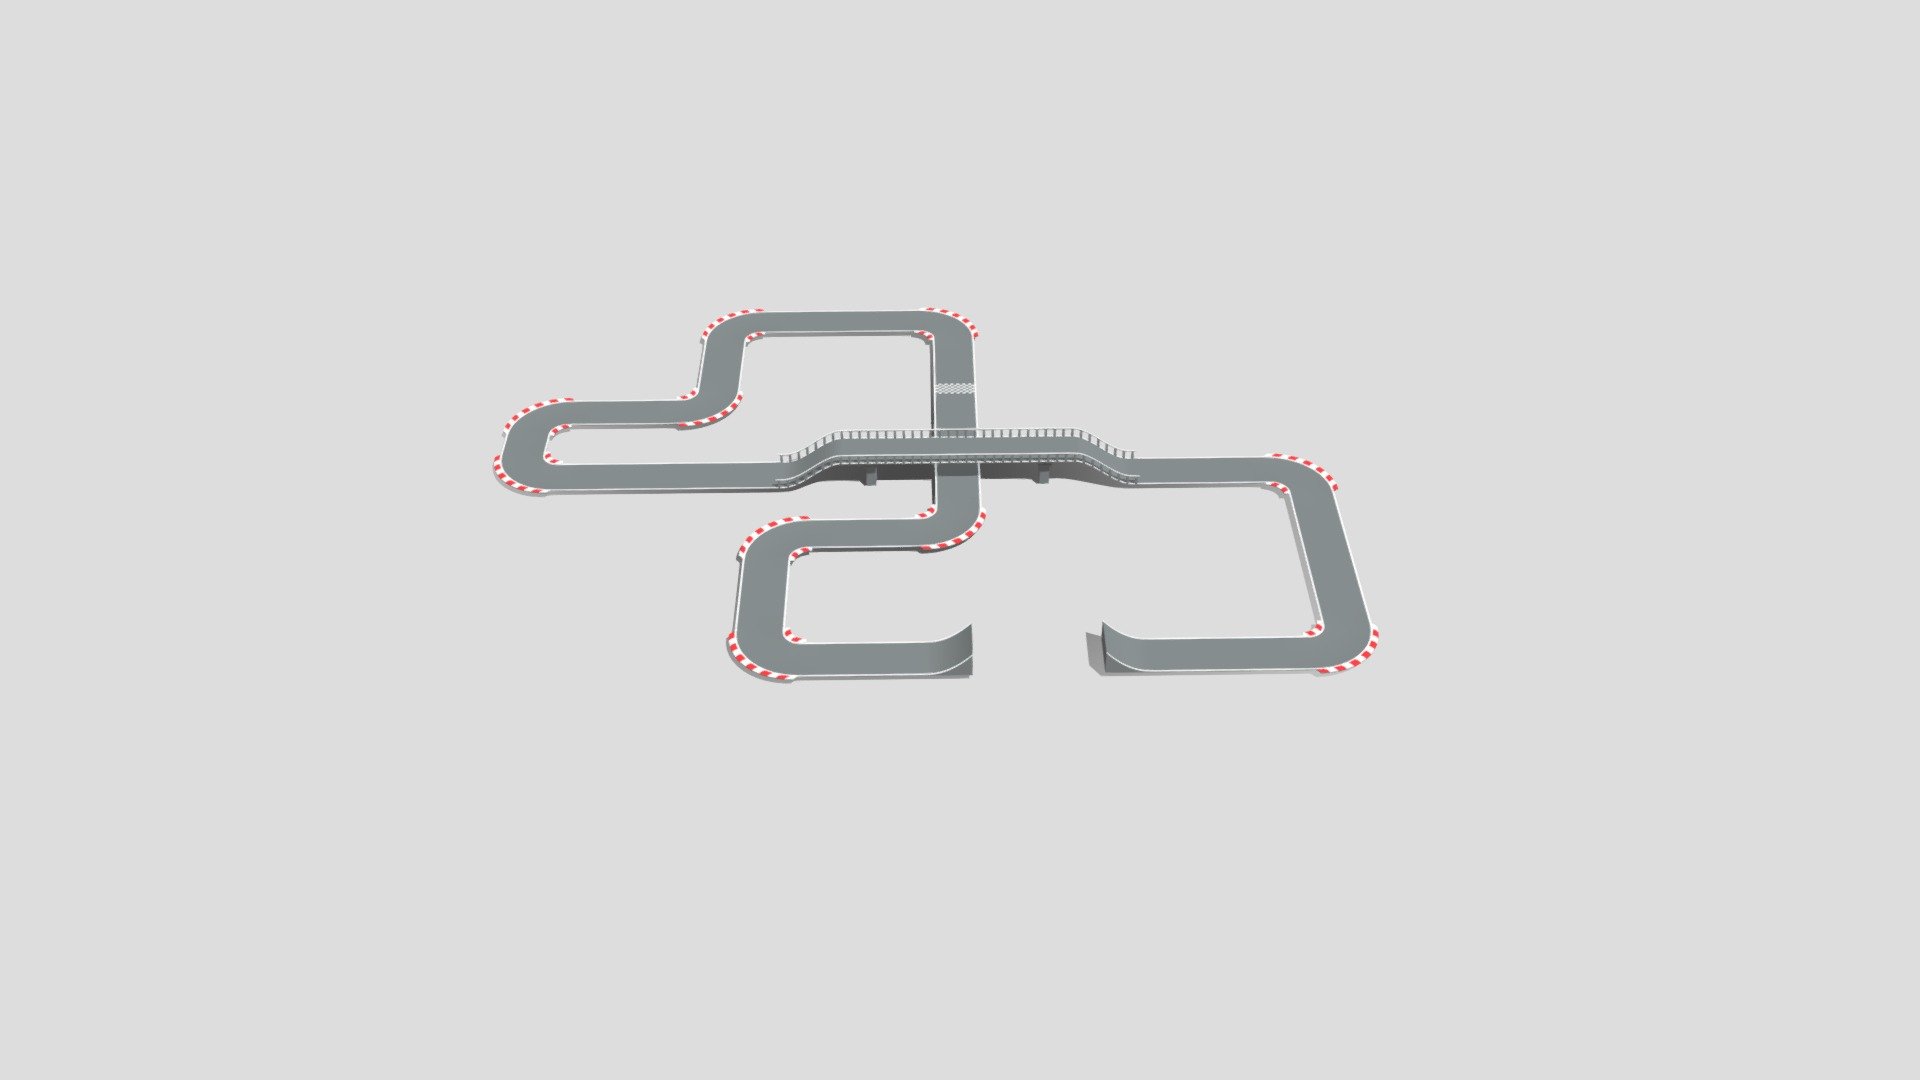 It's a low poly race track made in blender with ramp &amp; bridge.

lowpoly
racetrack - Low poly race track - Download Free 3D model by Harshluisydv 3d model